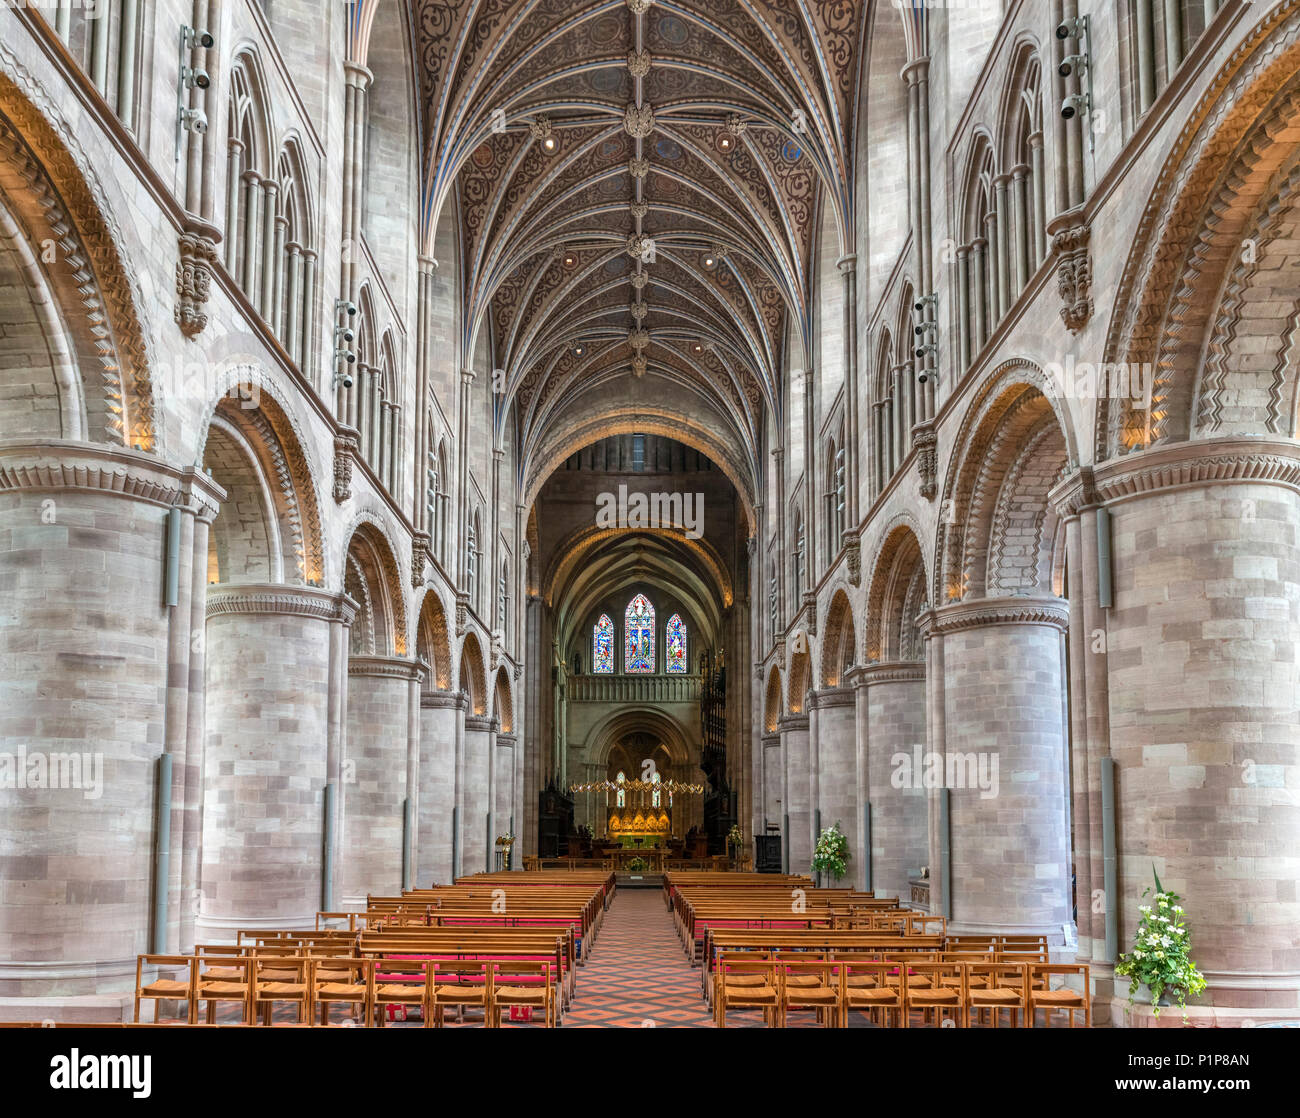 Interior of Hereford Cathedral, Hereford, Herefordshire, England, UK Stock Photo